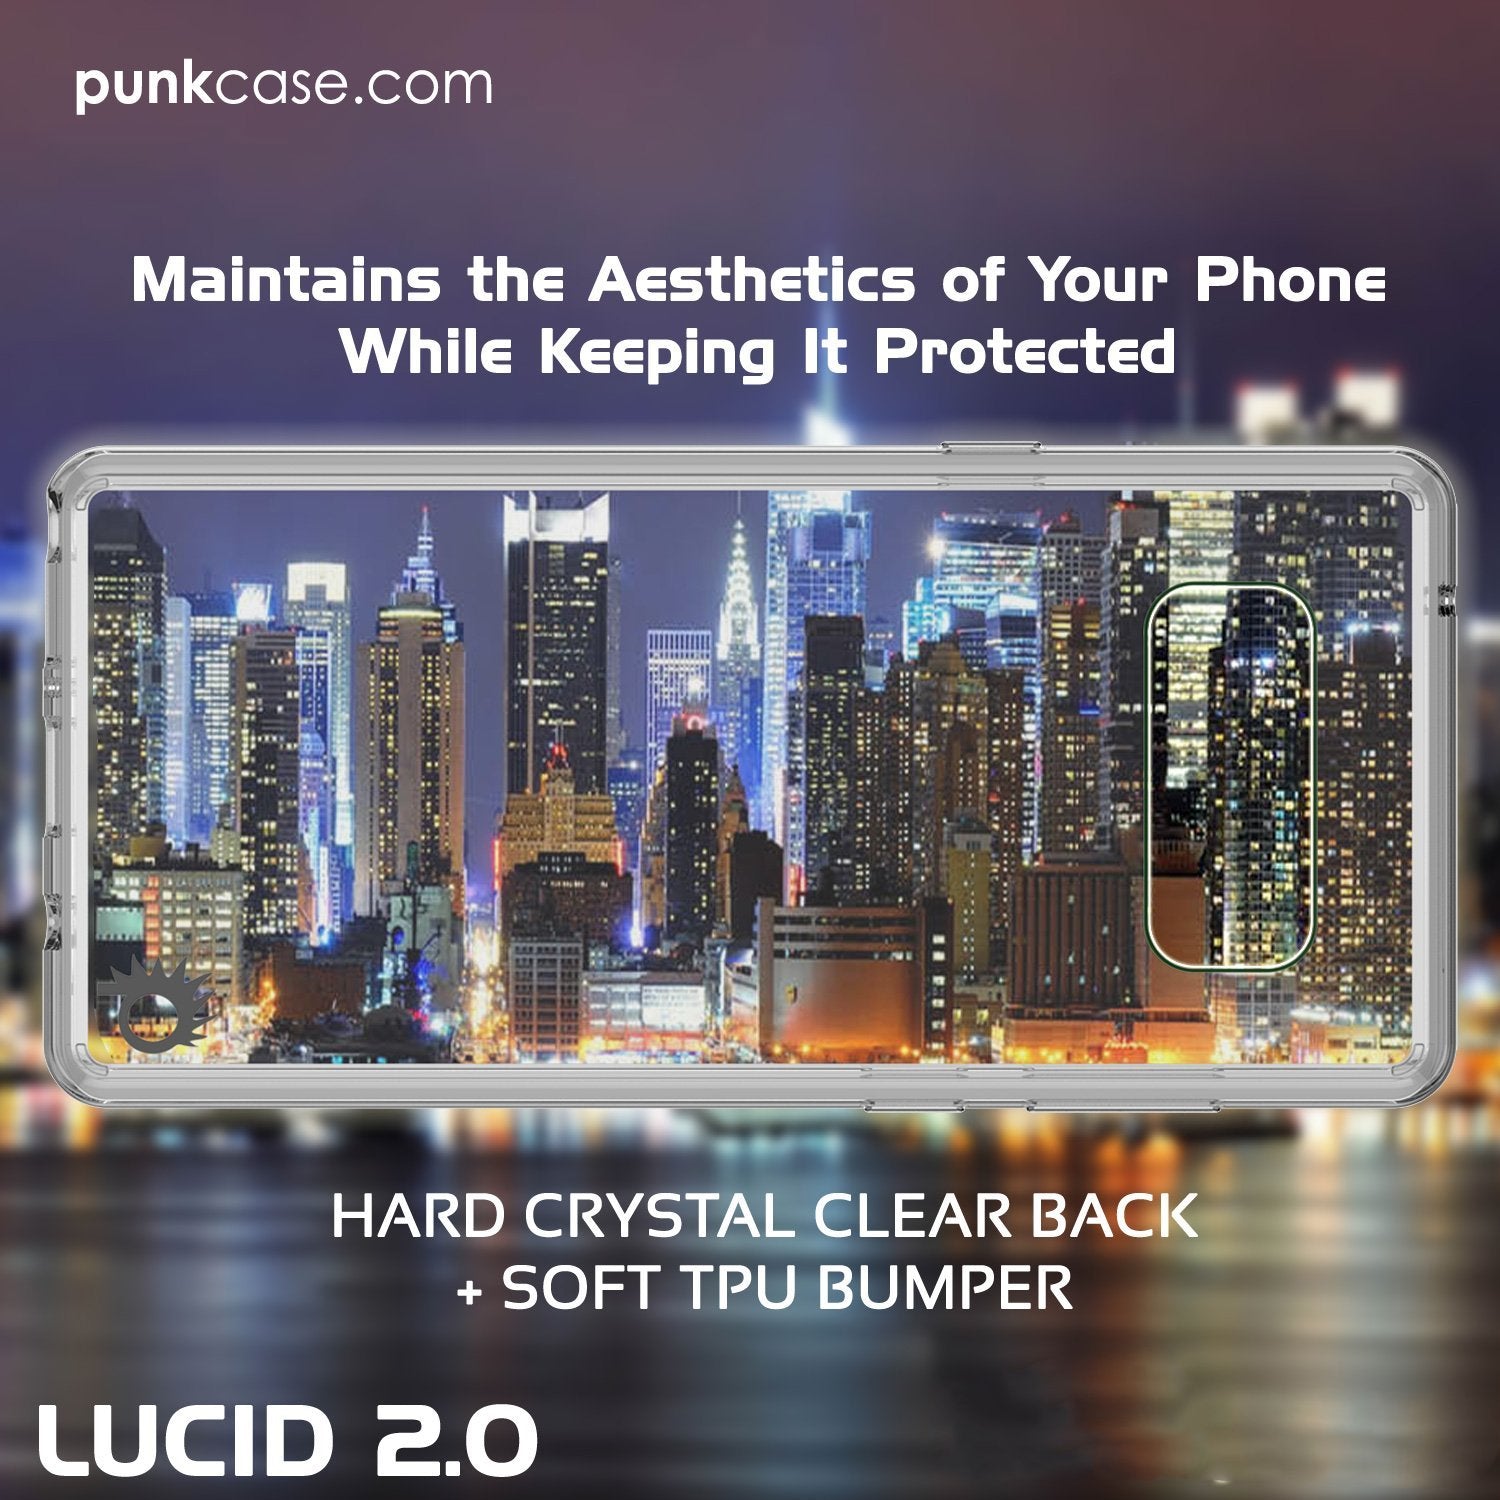 Galaxy Note 8 Punkcase, LUCID 2.0 Series Armor Cover, [Crystal Black]